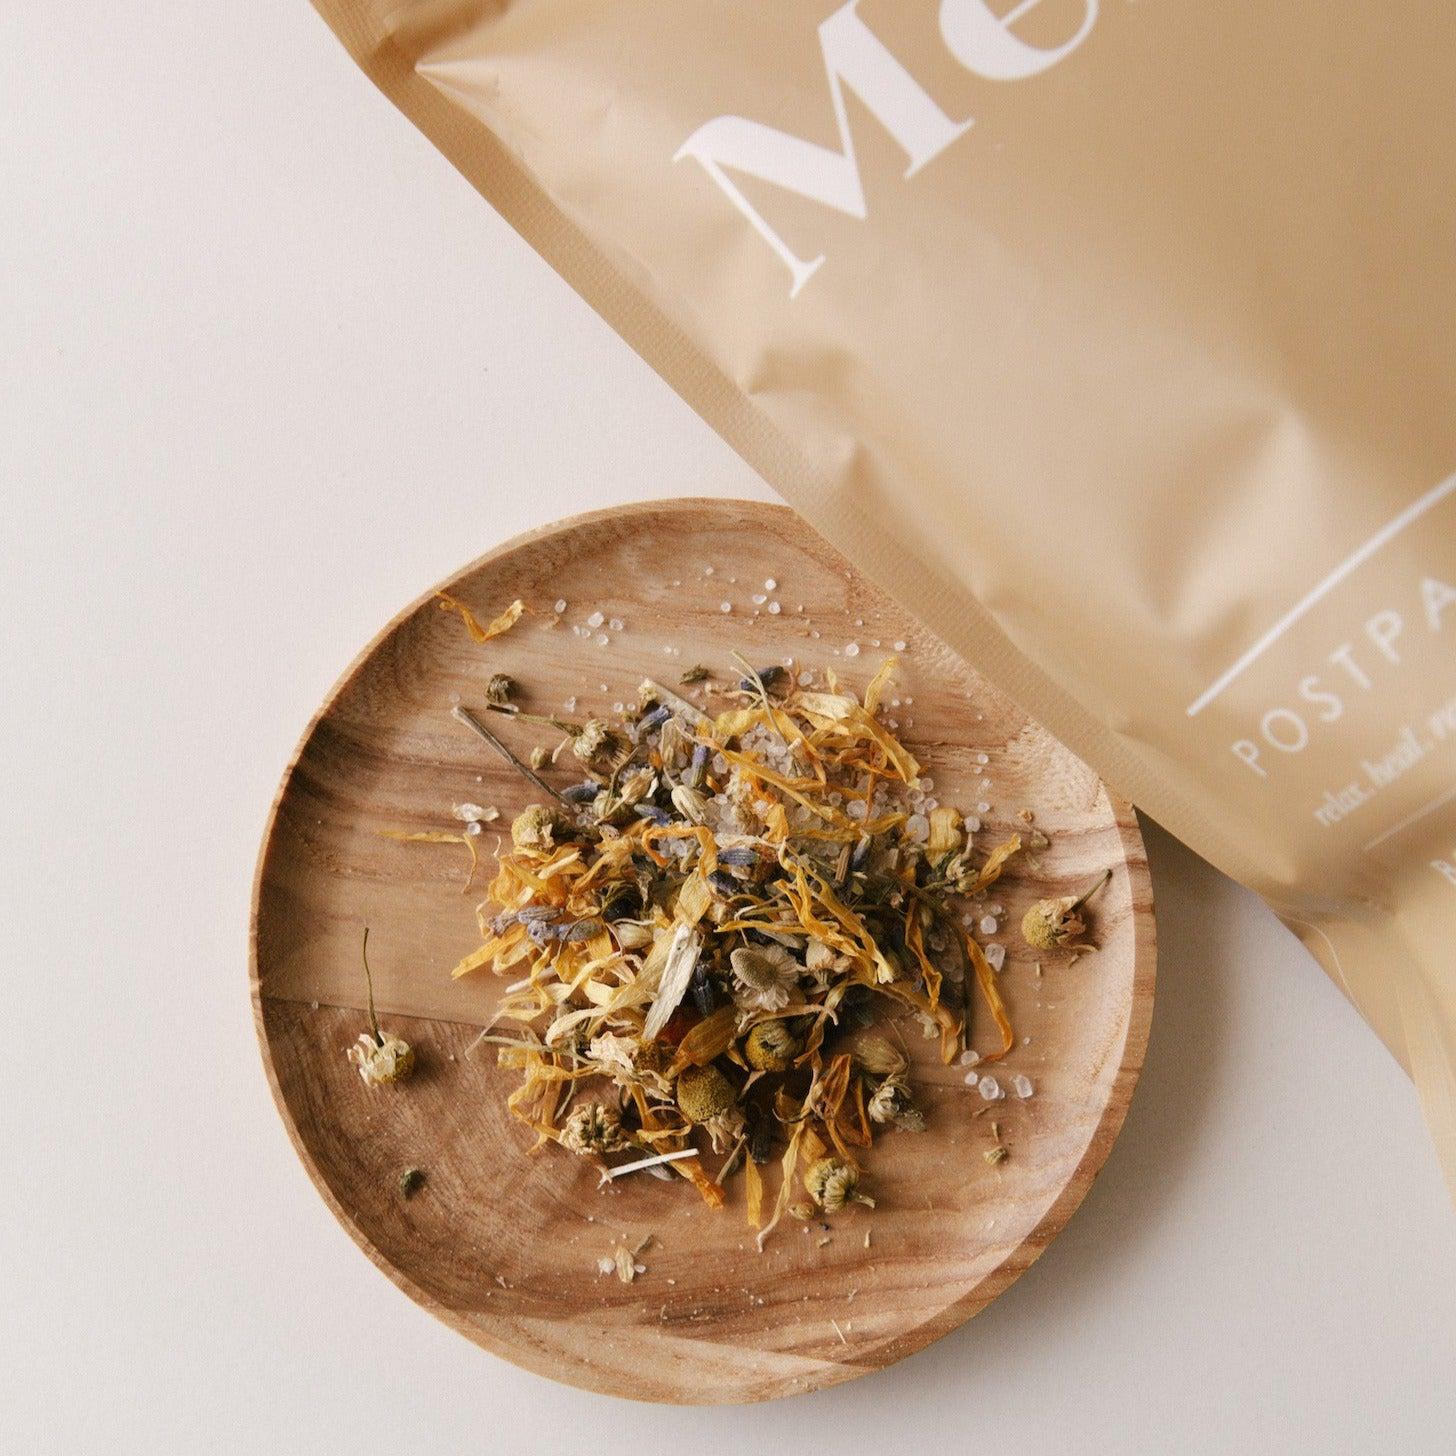 A wooden plate with dried herbs next to a bag of tea featuring Mère postpartum bath salts.